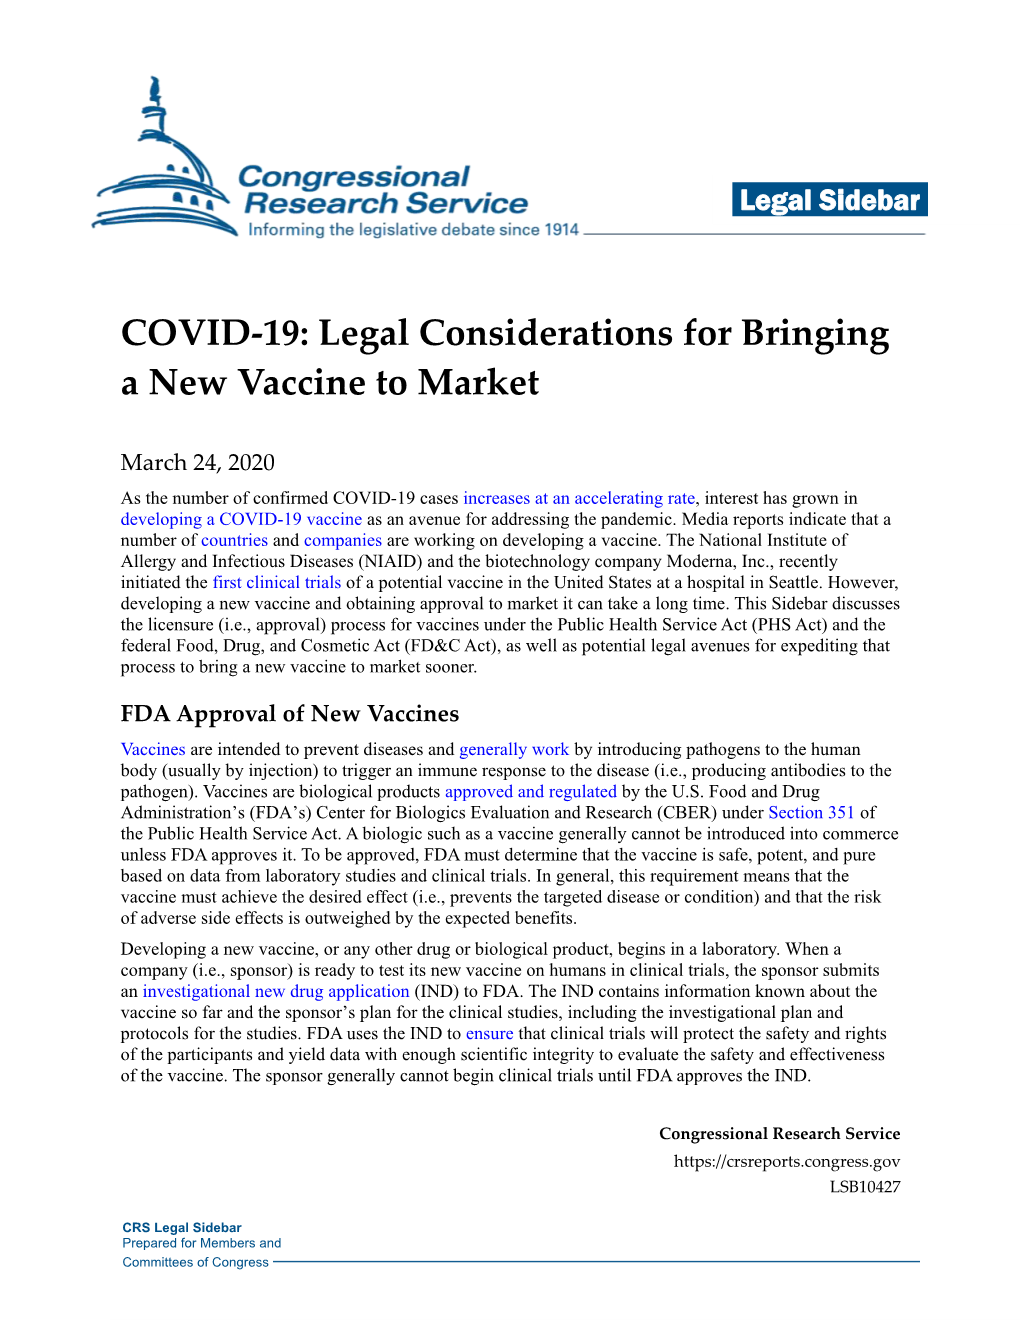 COVID-19: Legal Considerations for Bringing a New Vaccine to Market